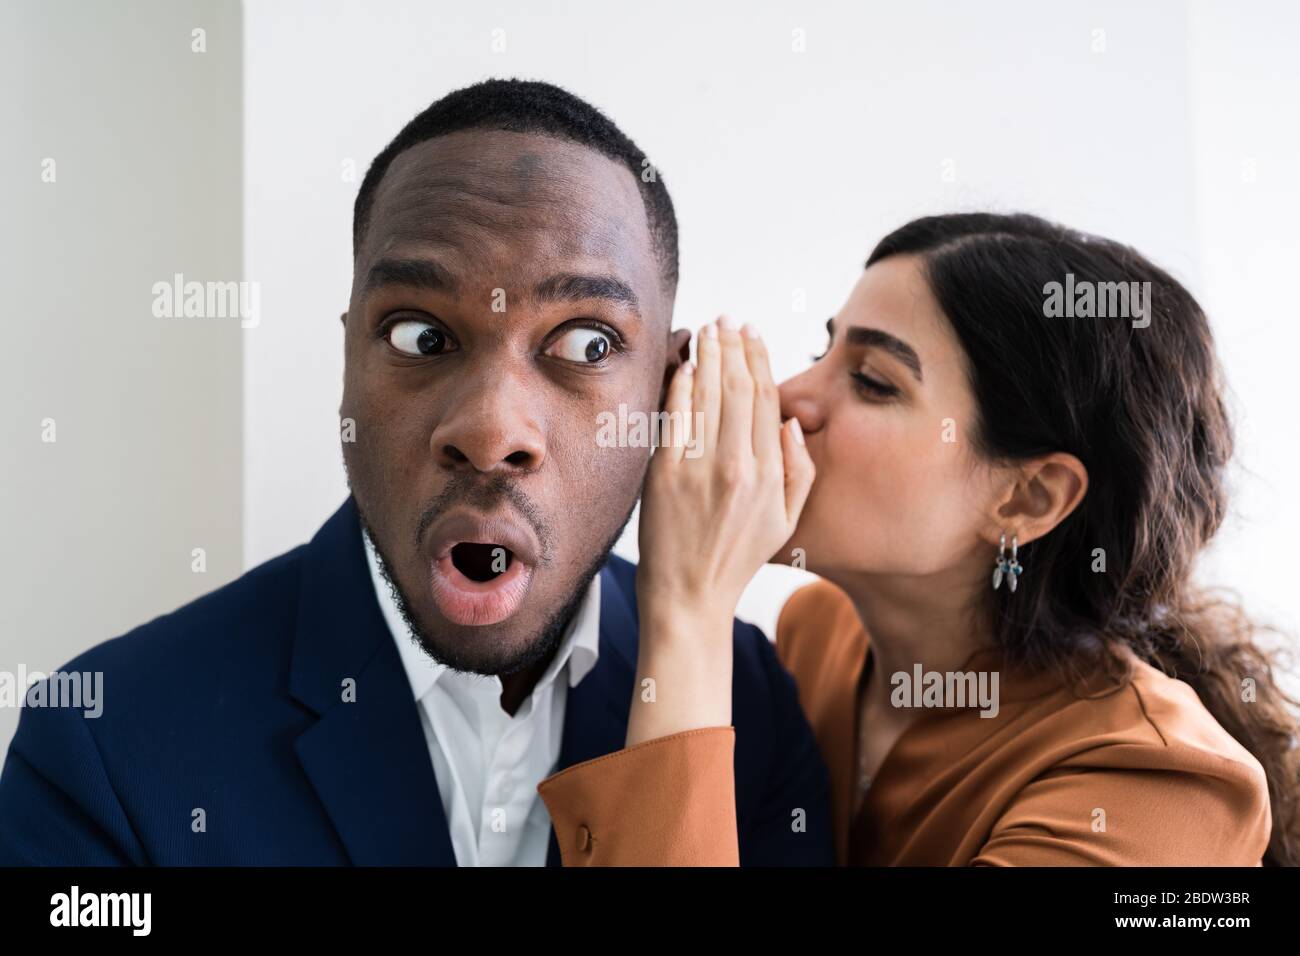 Portrait Of Happy Woman Whispering Secret Or Interesting Gossip To Handsome Man In His Ear Stock Photo